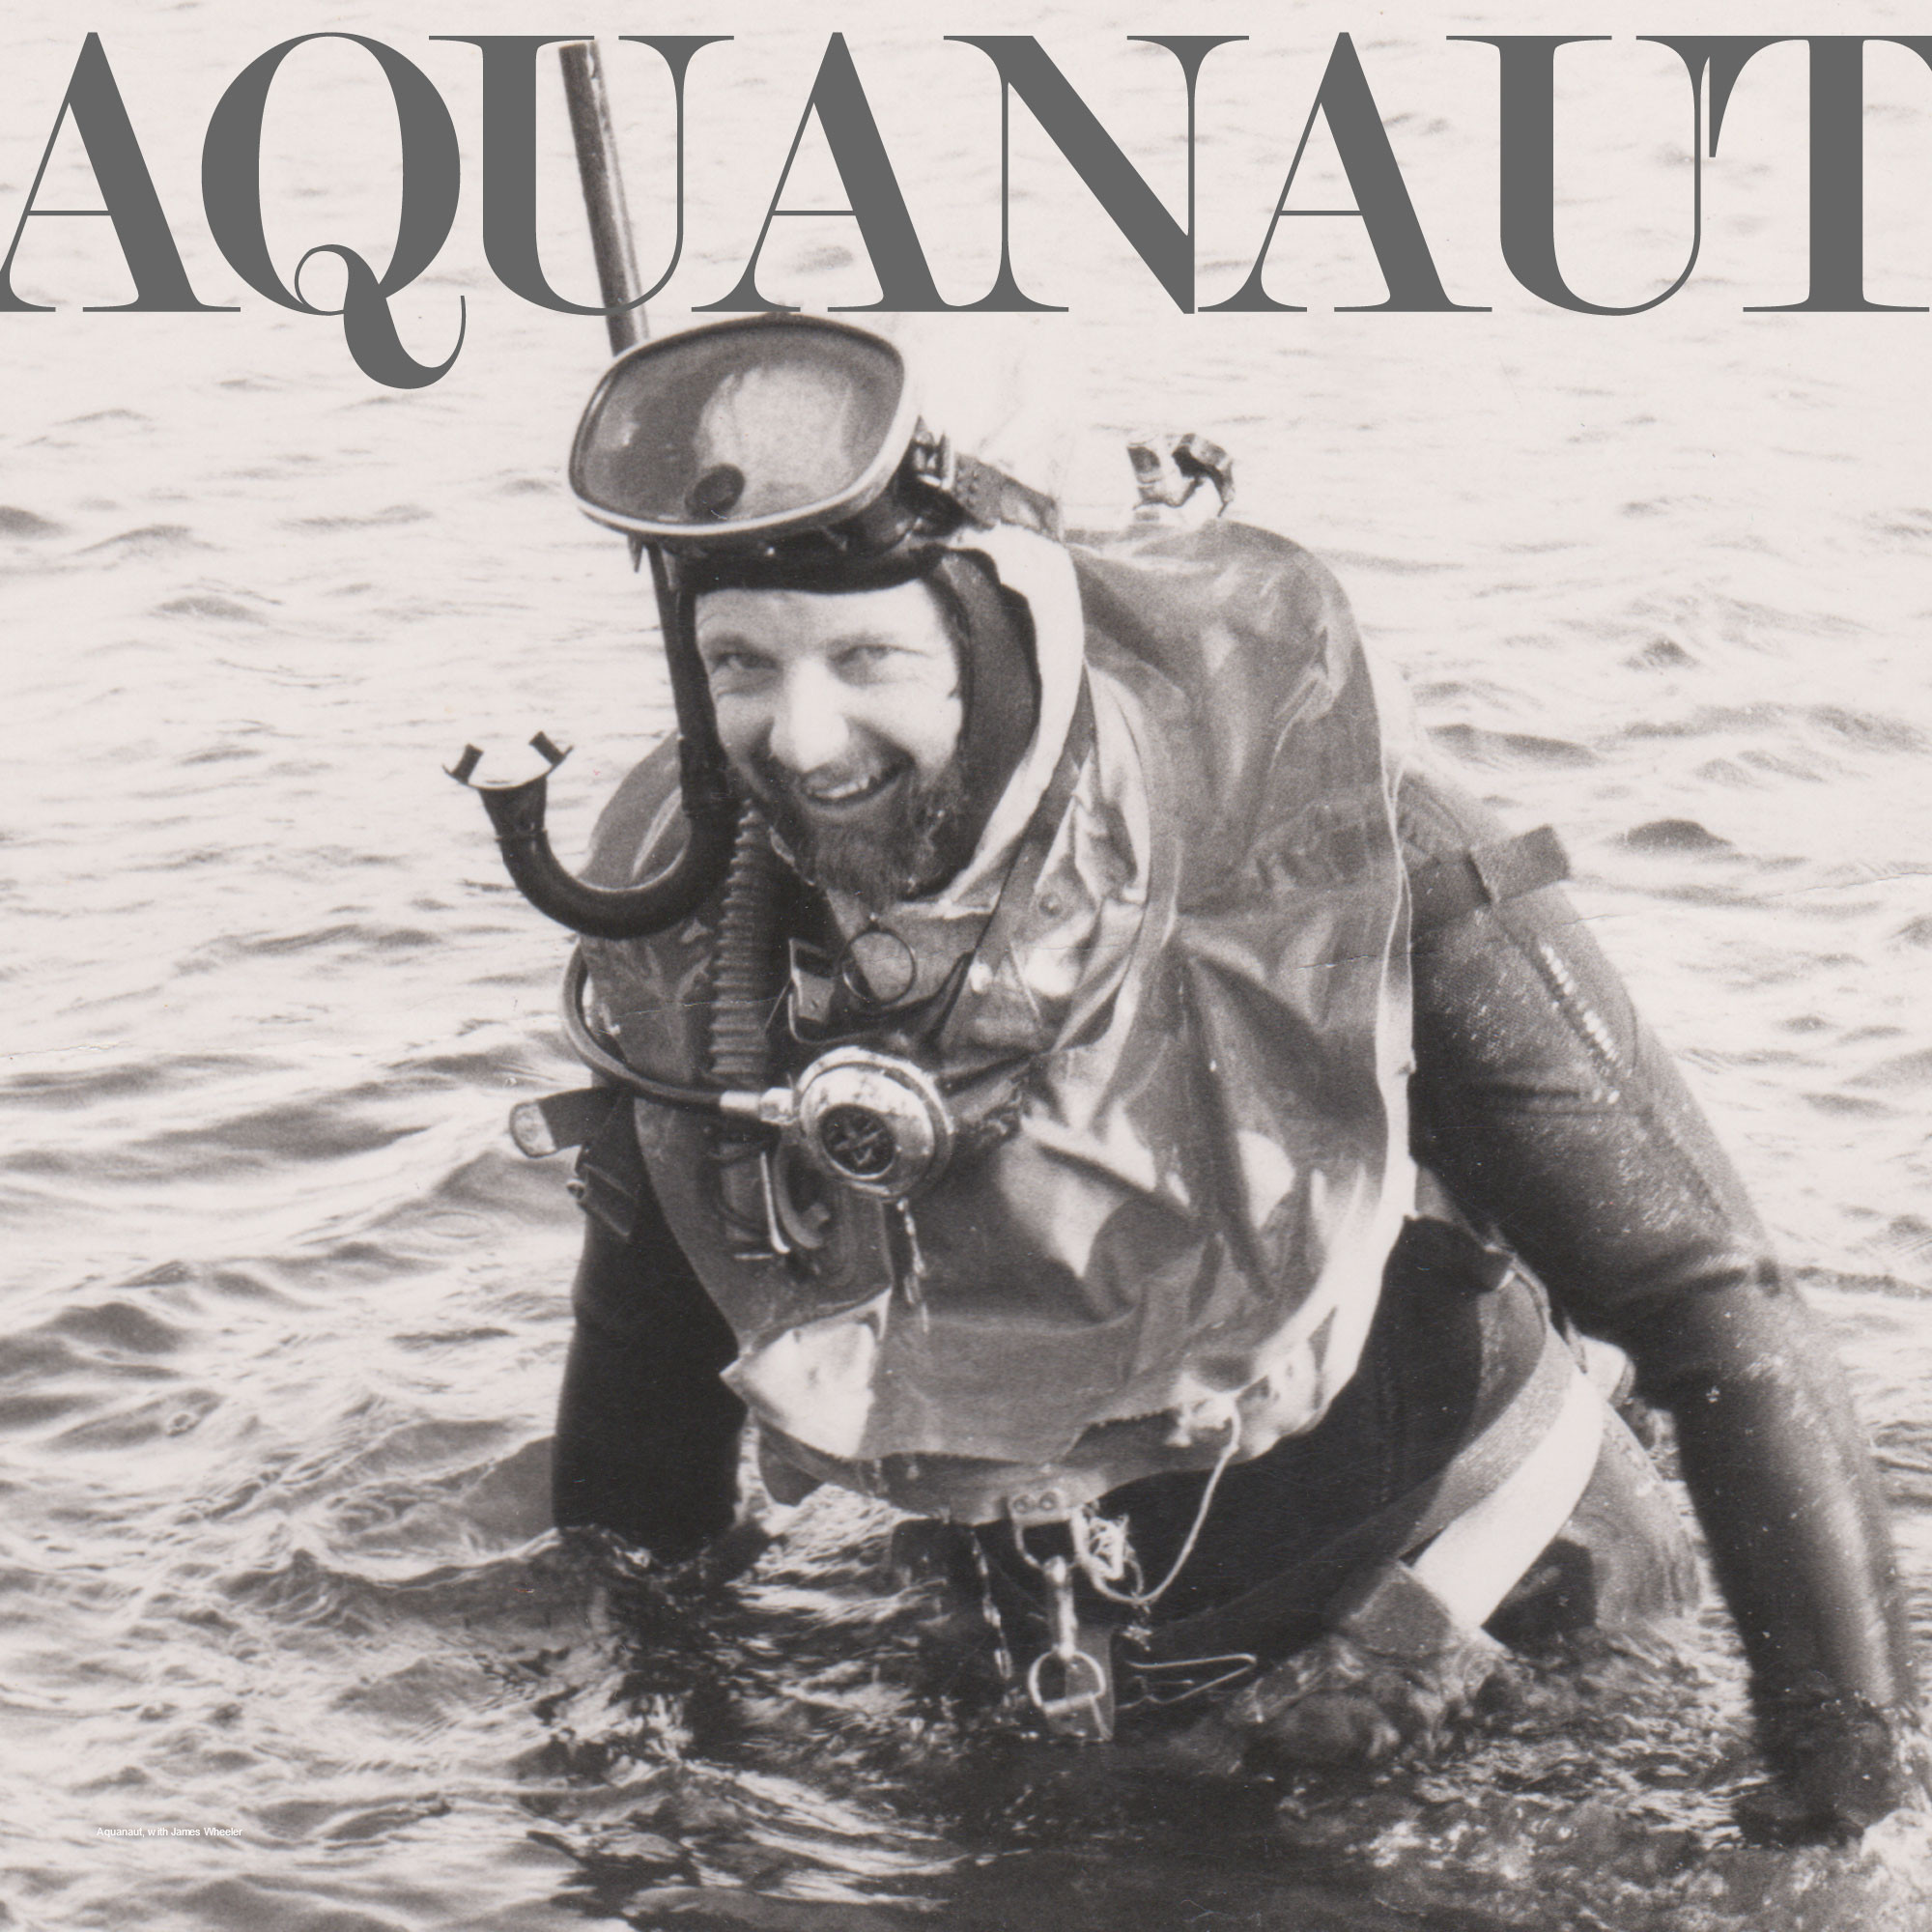 cover art for Aquanaut - Episode 6: My first night dive, the acquisition of our dive boat “Aquanaut”, and our first salvage dives.